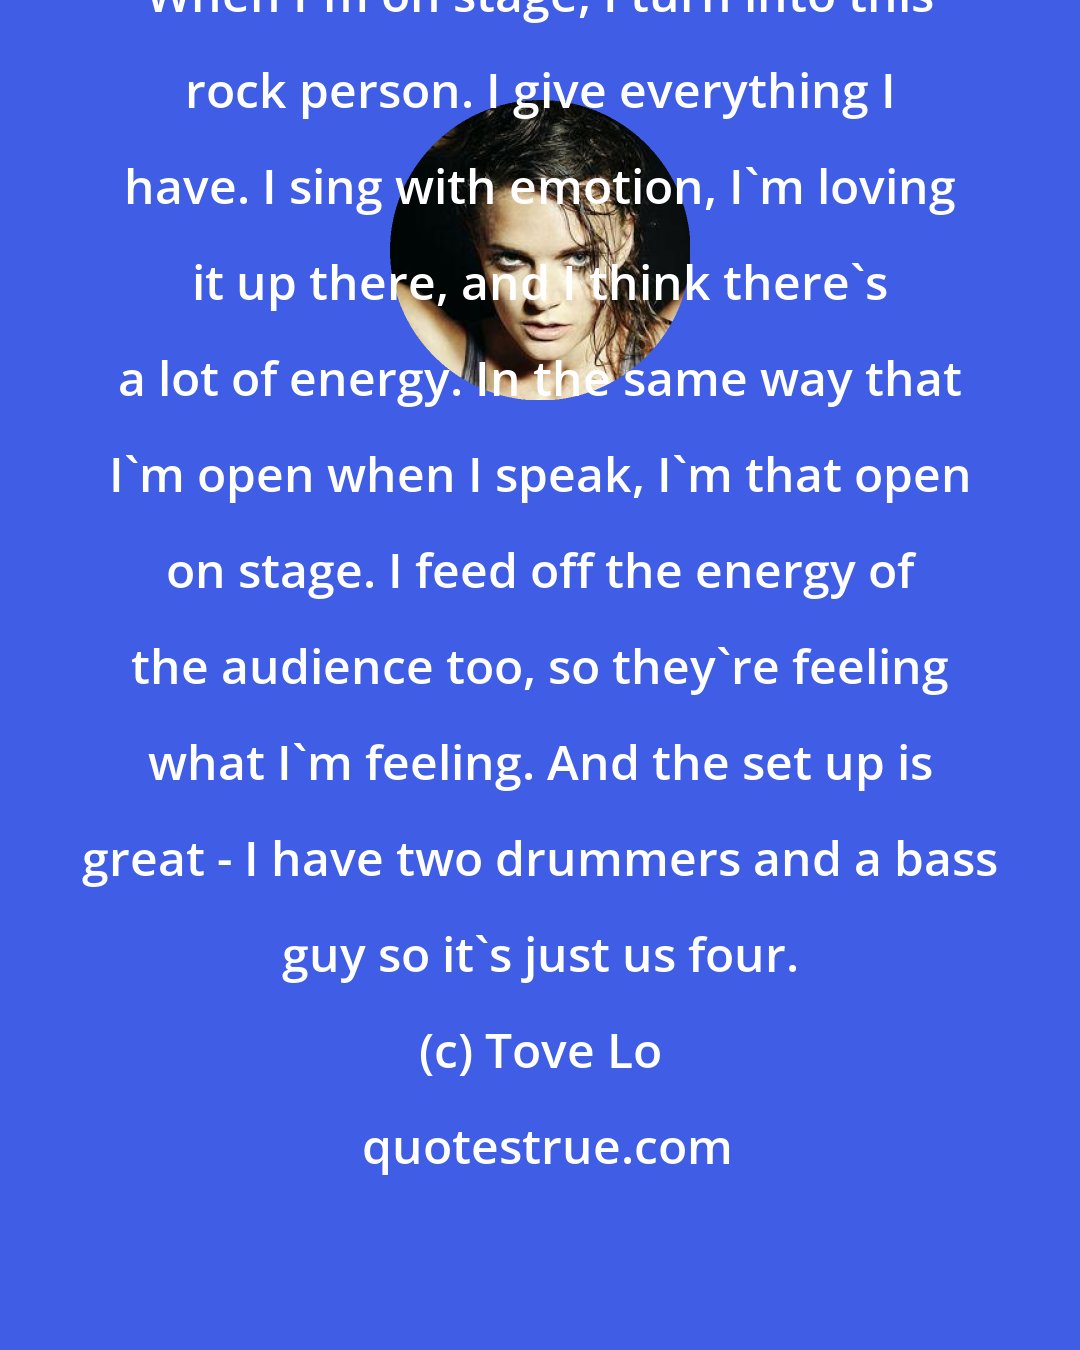 Tove Lo: When I'm on stage, I turn into this rock person. I give everything I have. I sing with emotion, I'm loving it up there, and I think there's a lot of energy. In the same way that I'm open when I speak, I'm that open on stage. I feed off the energy of the audience too, so they're feeling what I'm feeling. And the set up is great - I have two drummers and a bass guy so it's just us four.